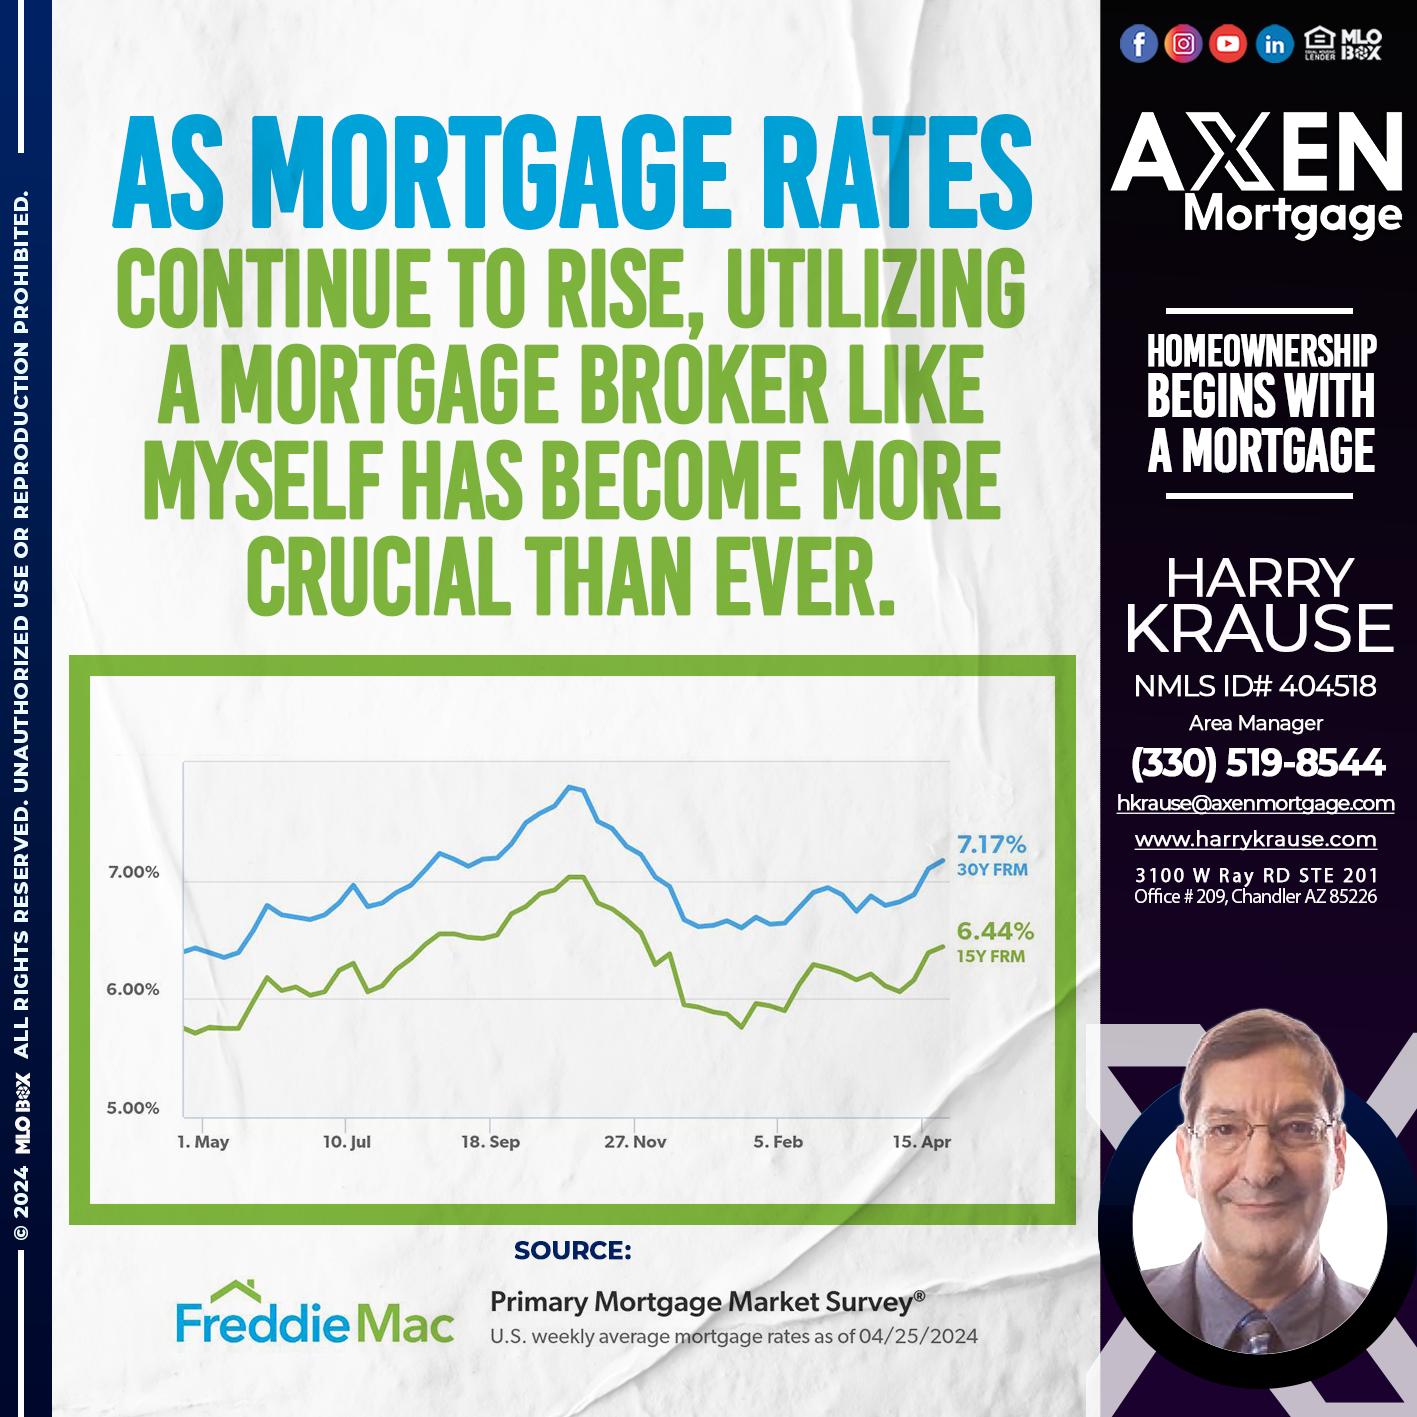 mortgage rates - Harry Krause -Area Manager